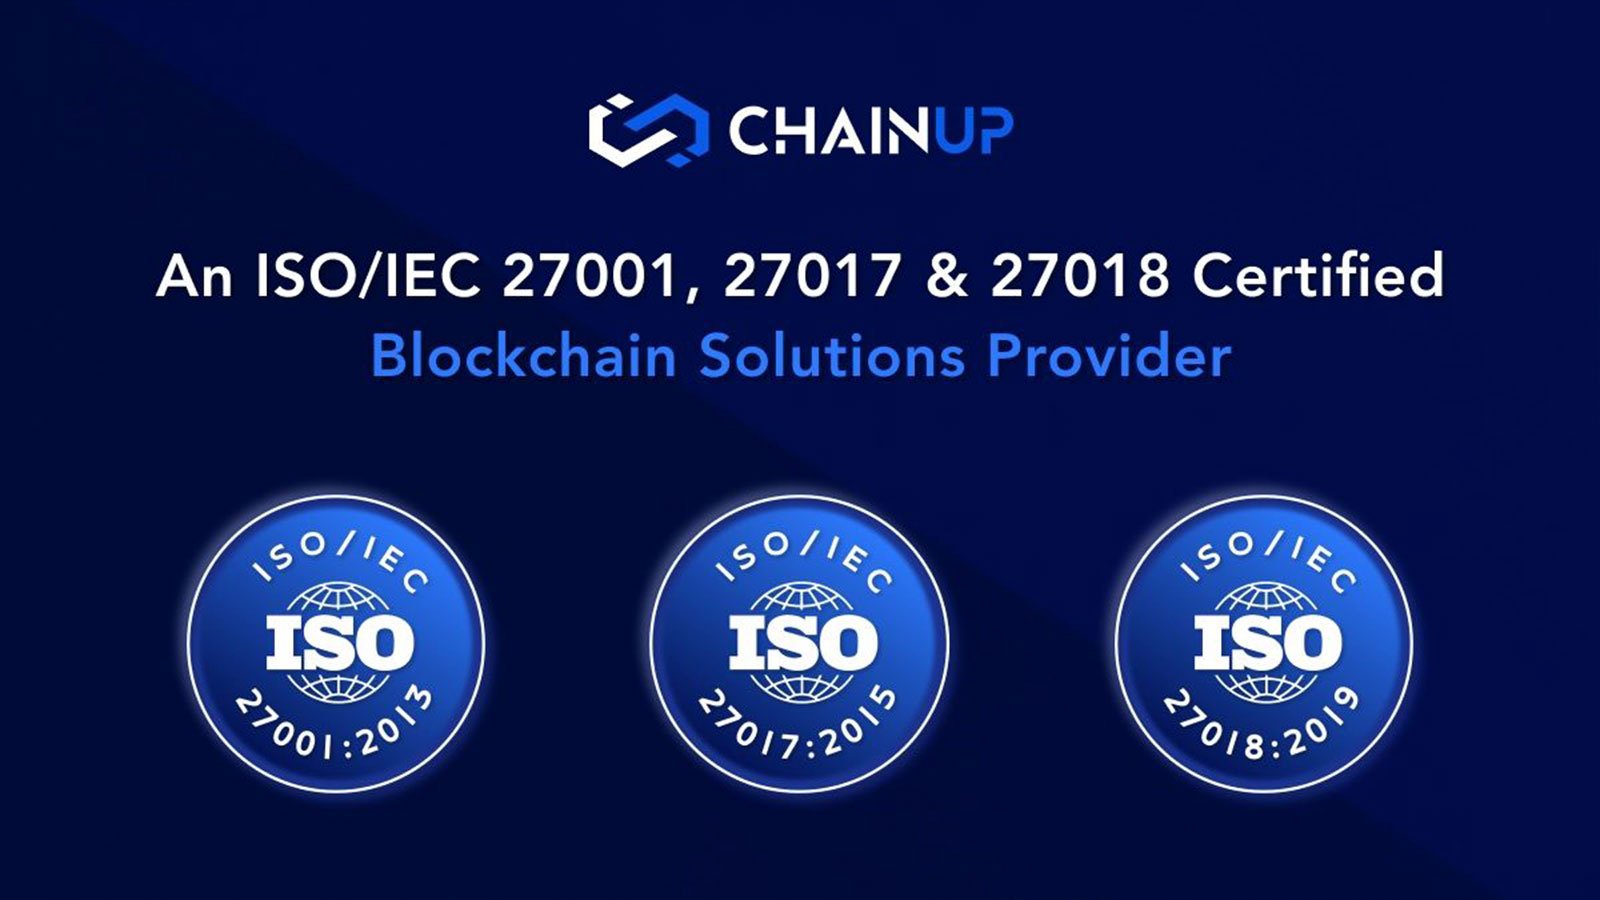 ChainUp Is Now an ISO/IEC 27001, 27017 & 27018 Certified Blockchain Solutions Provider